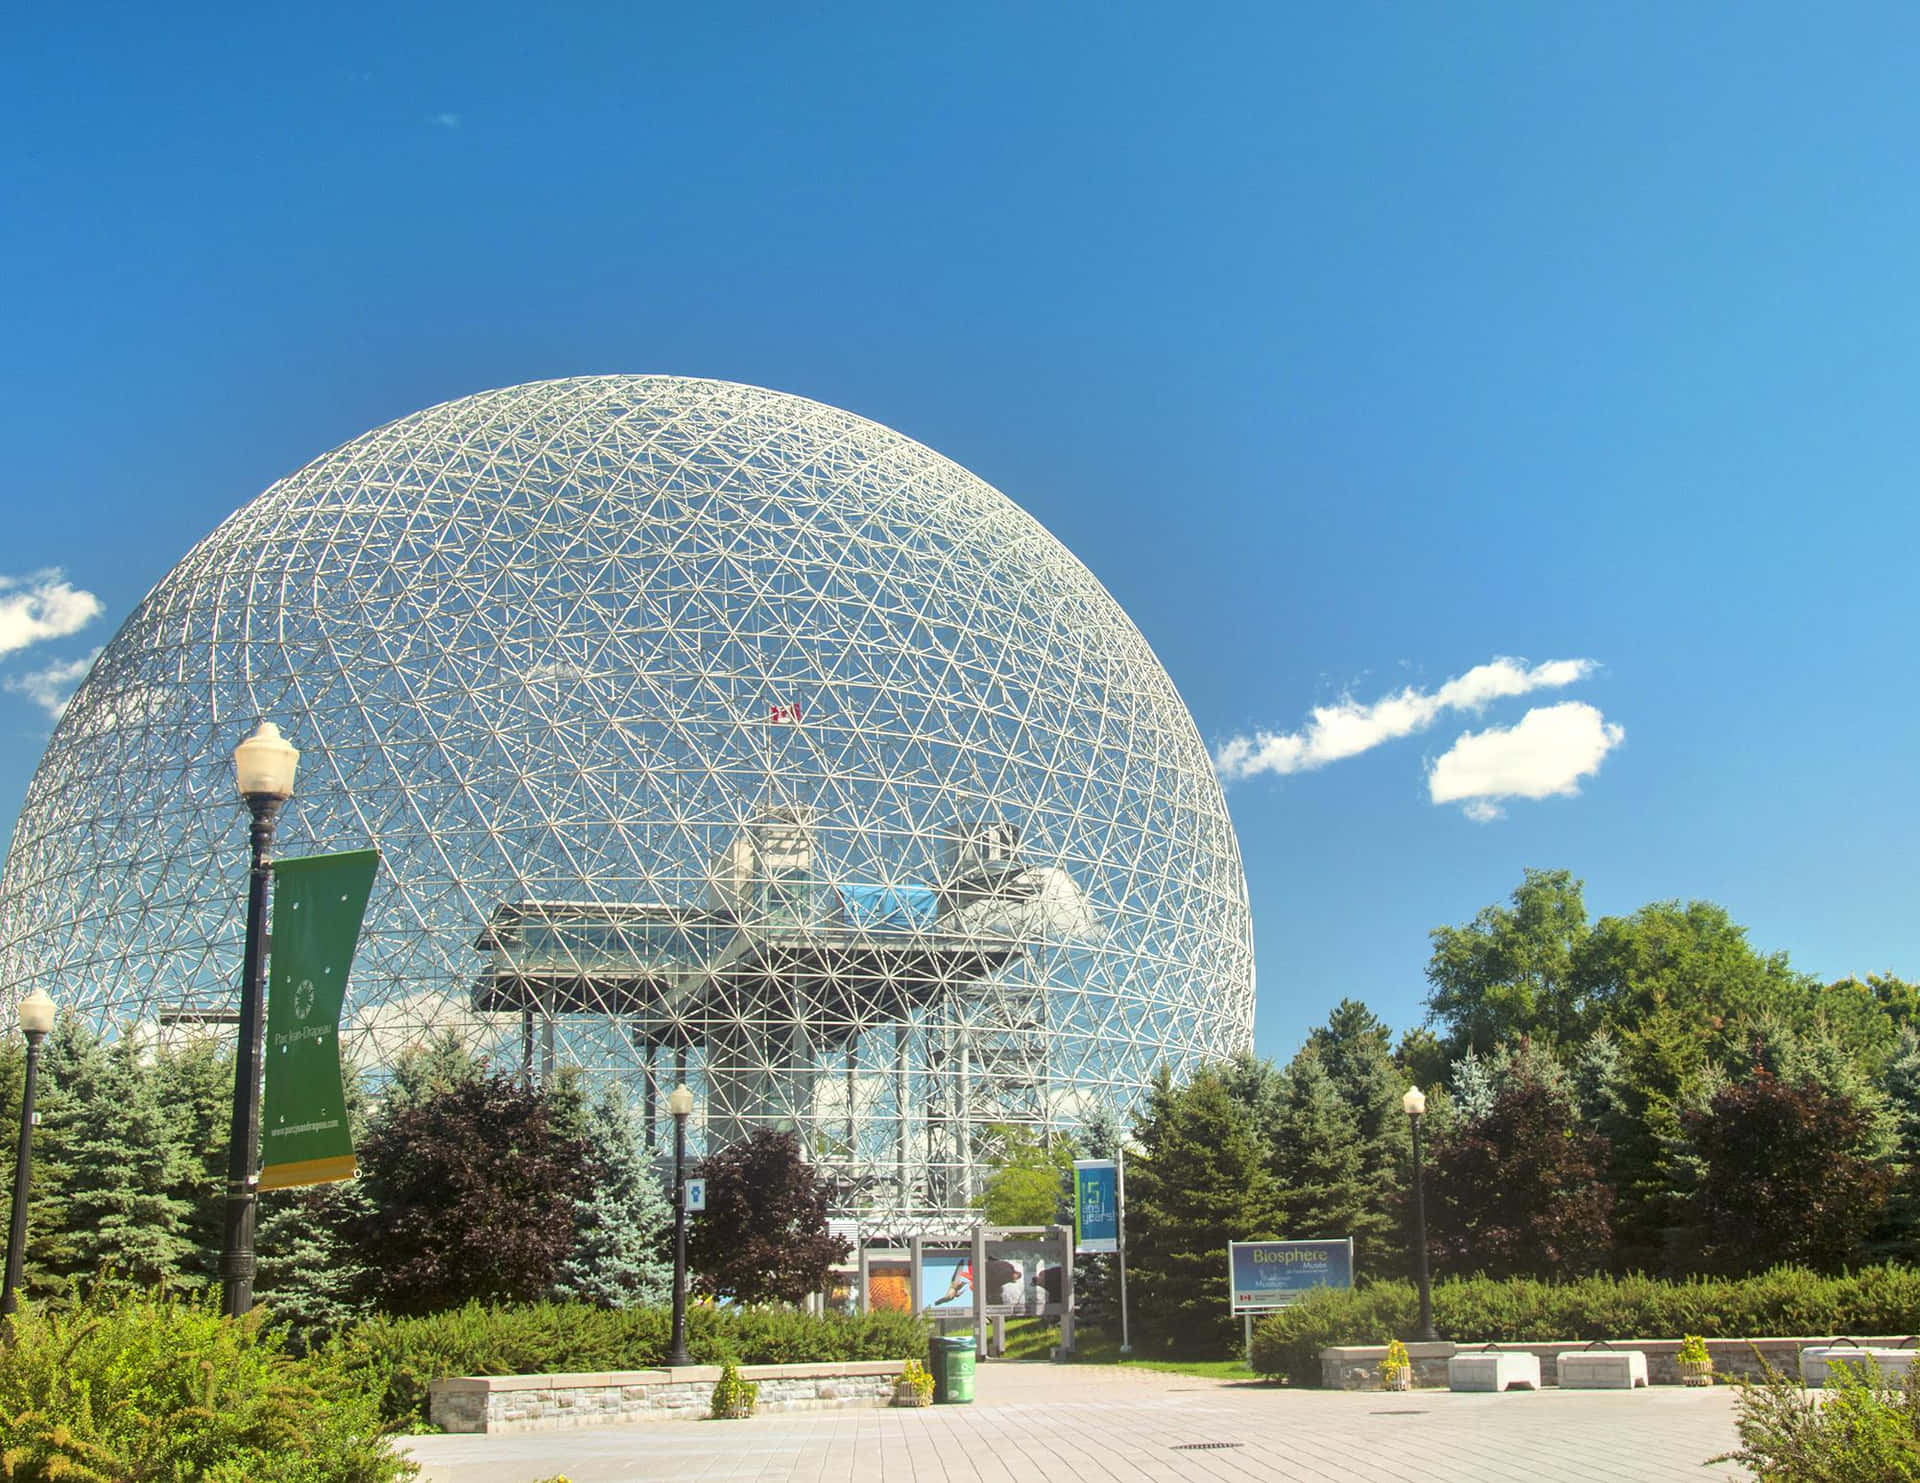 A tranquil view of the biosphere set in front of a blanket of clouds